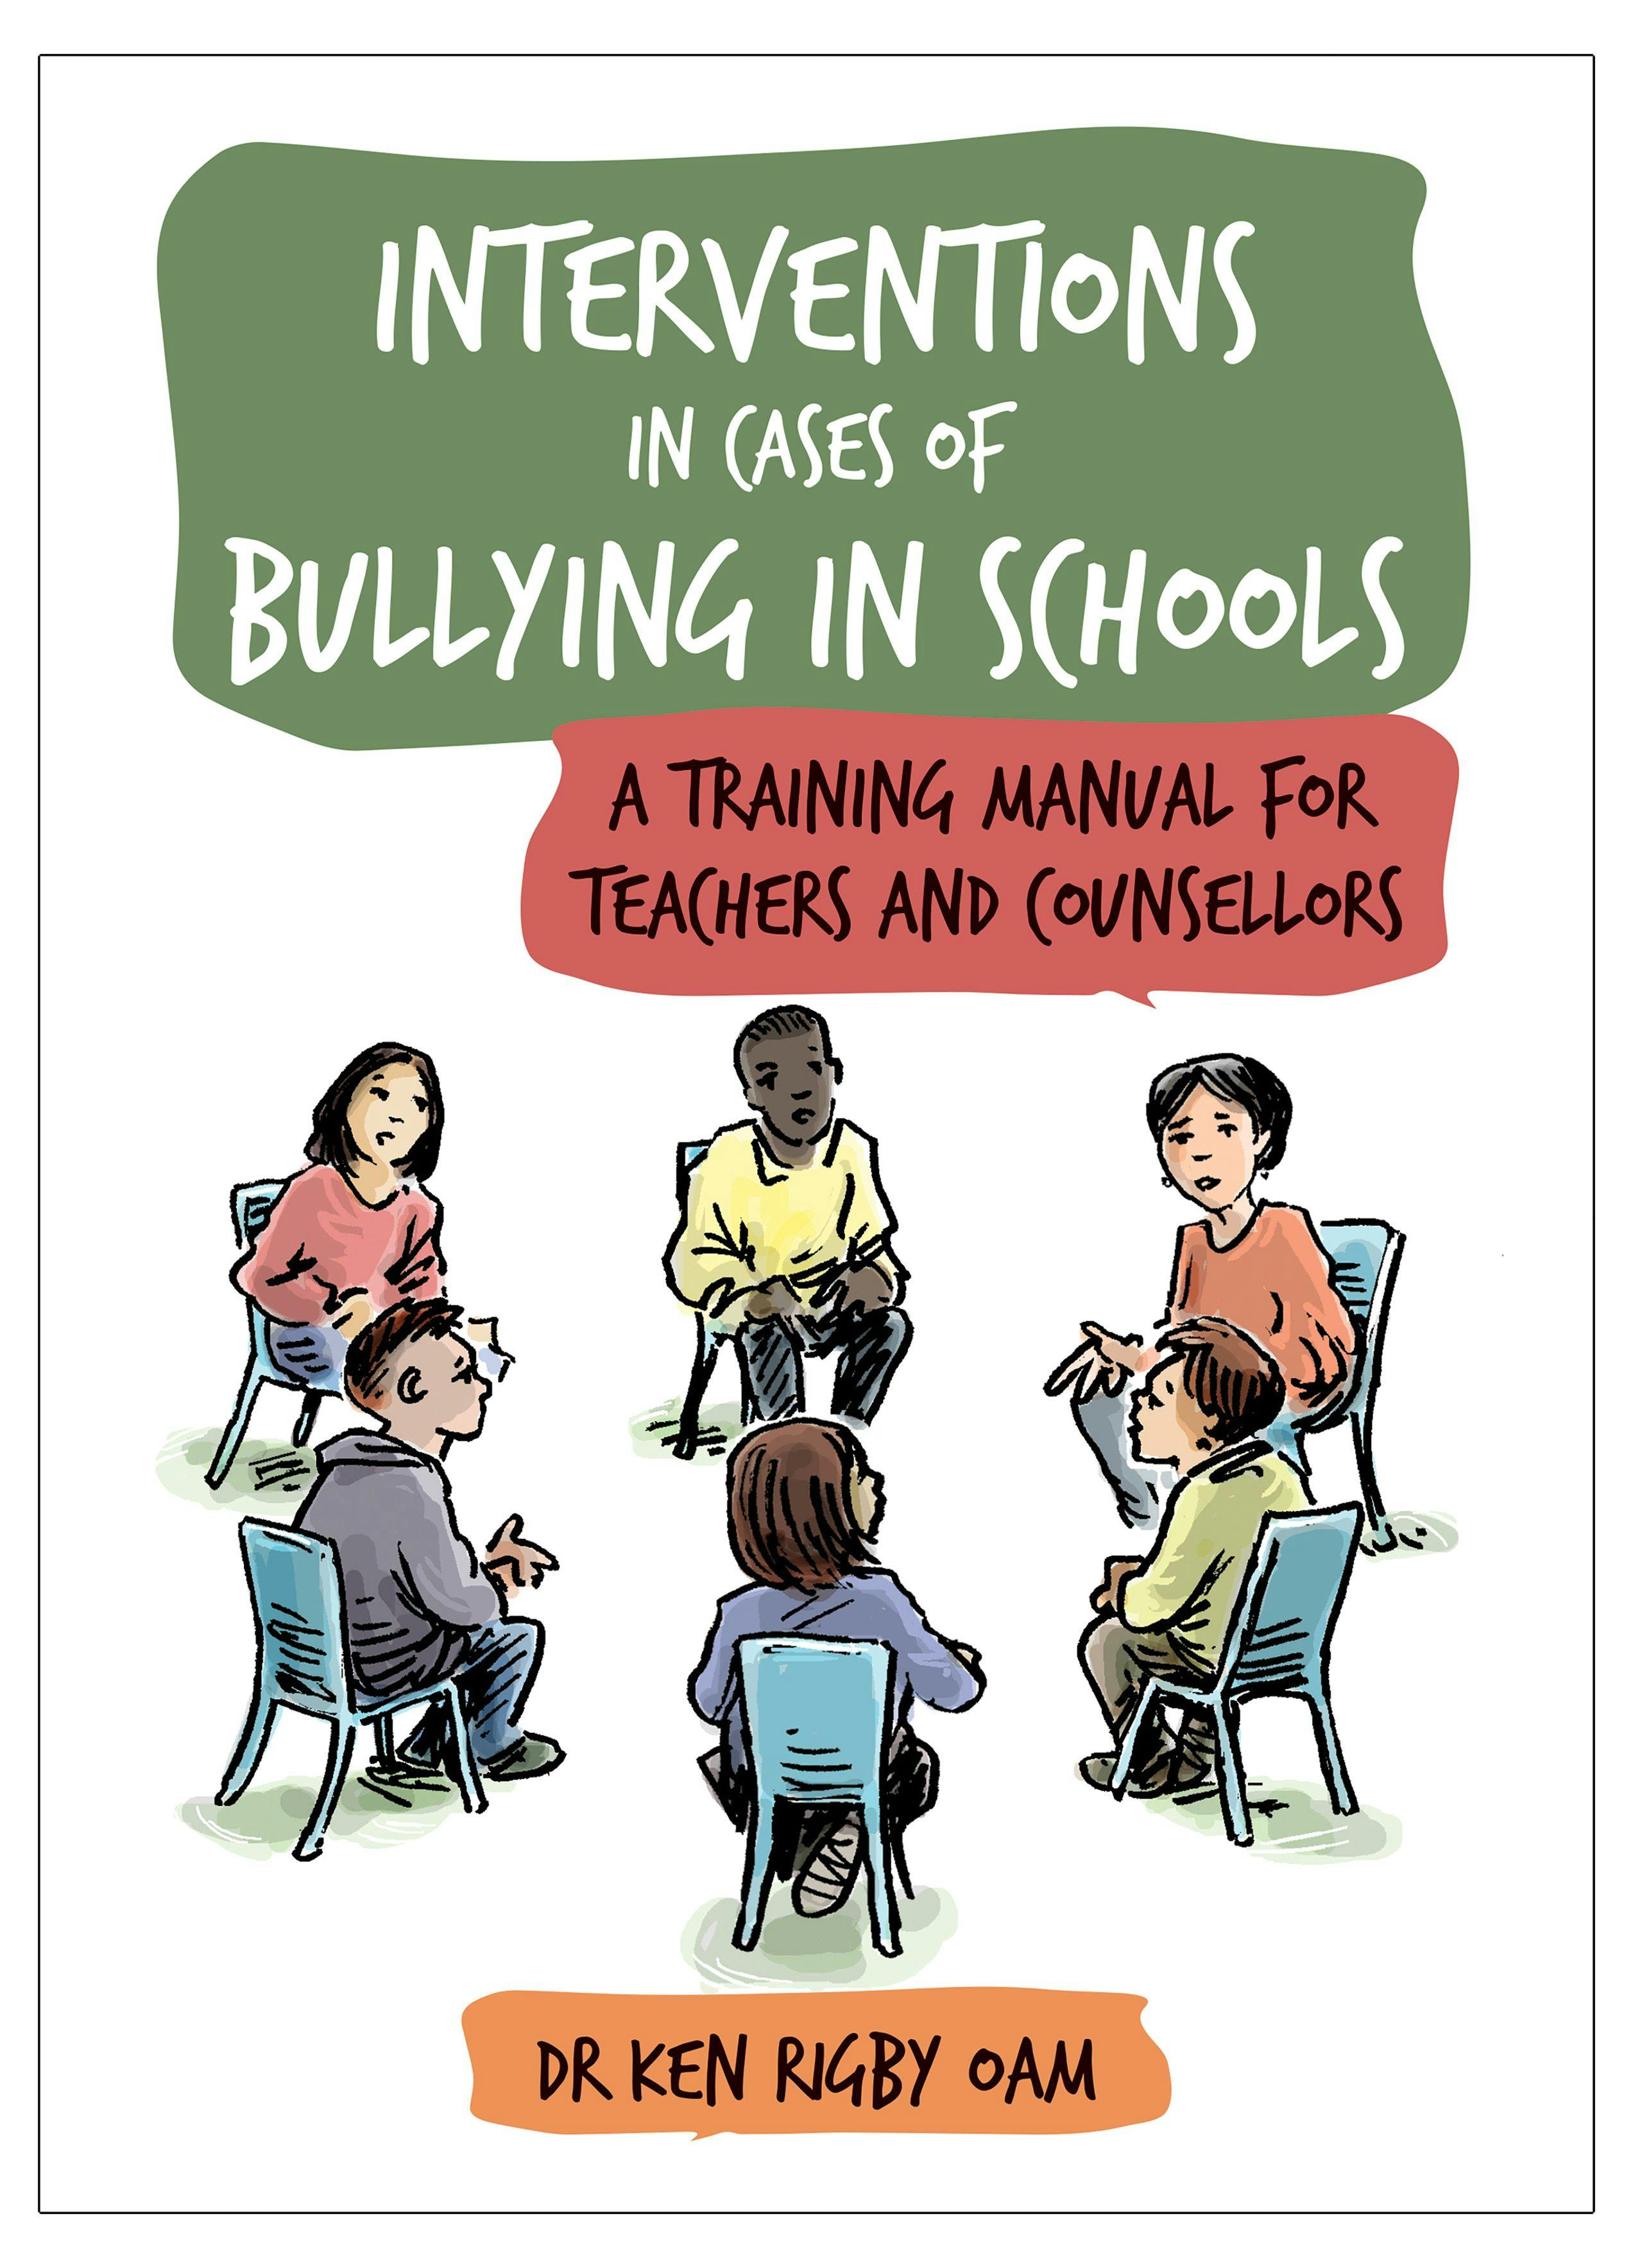 Book cover of "Interventions in Cases of Bullying in Schools"